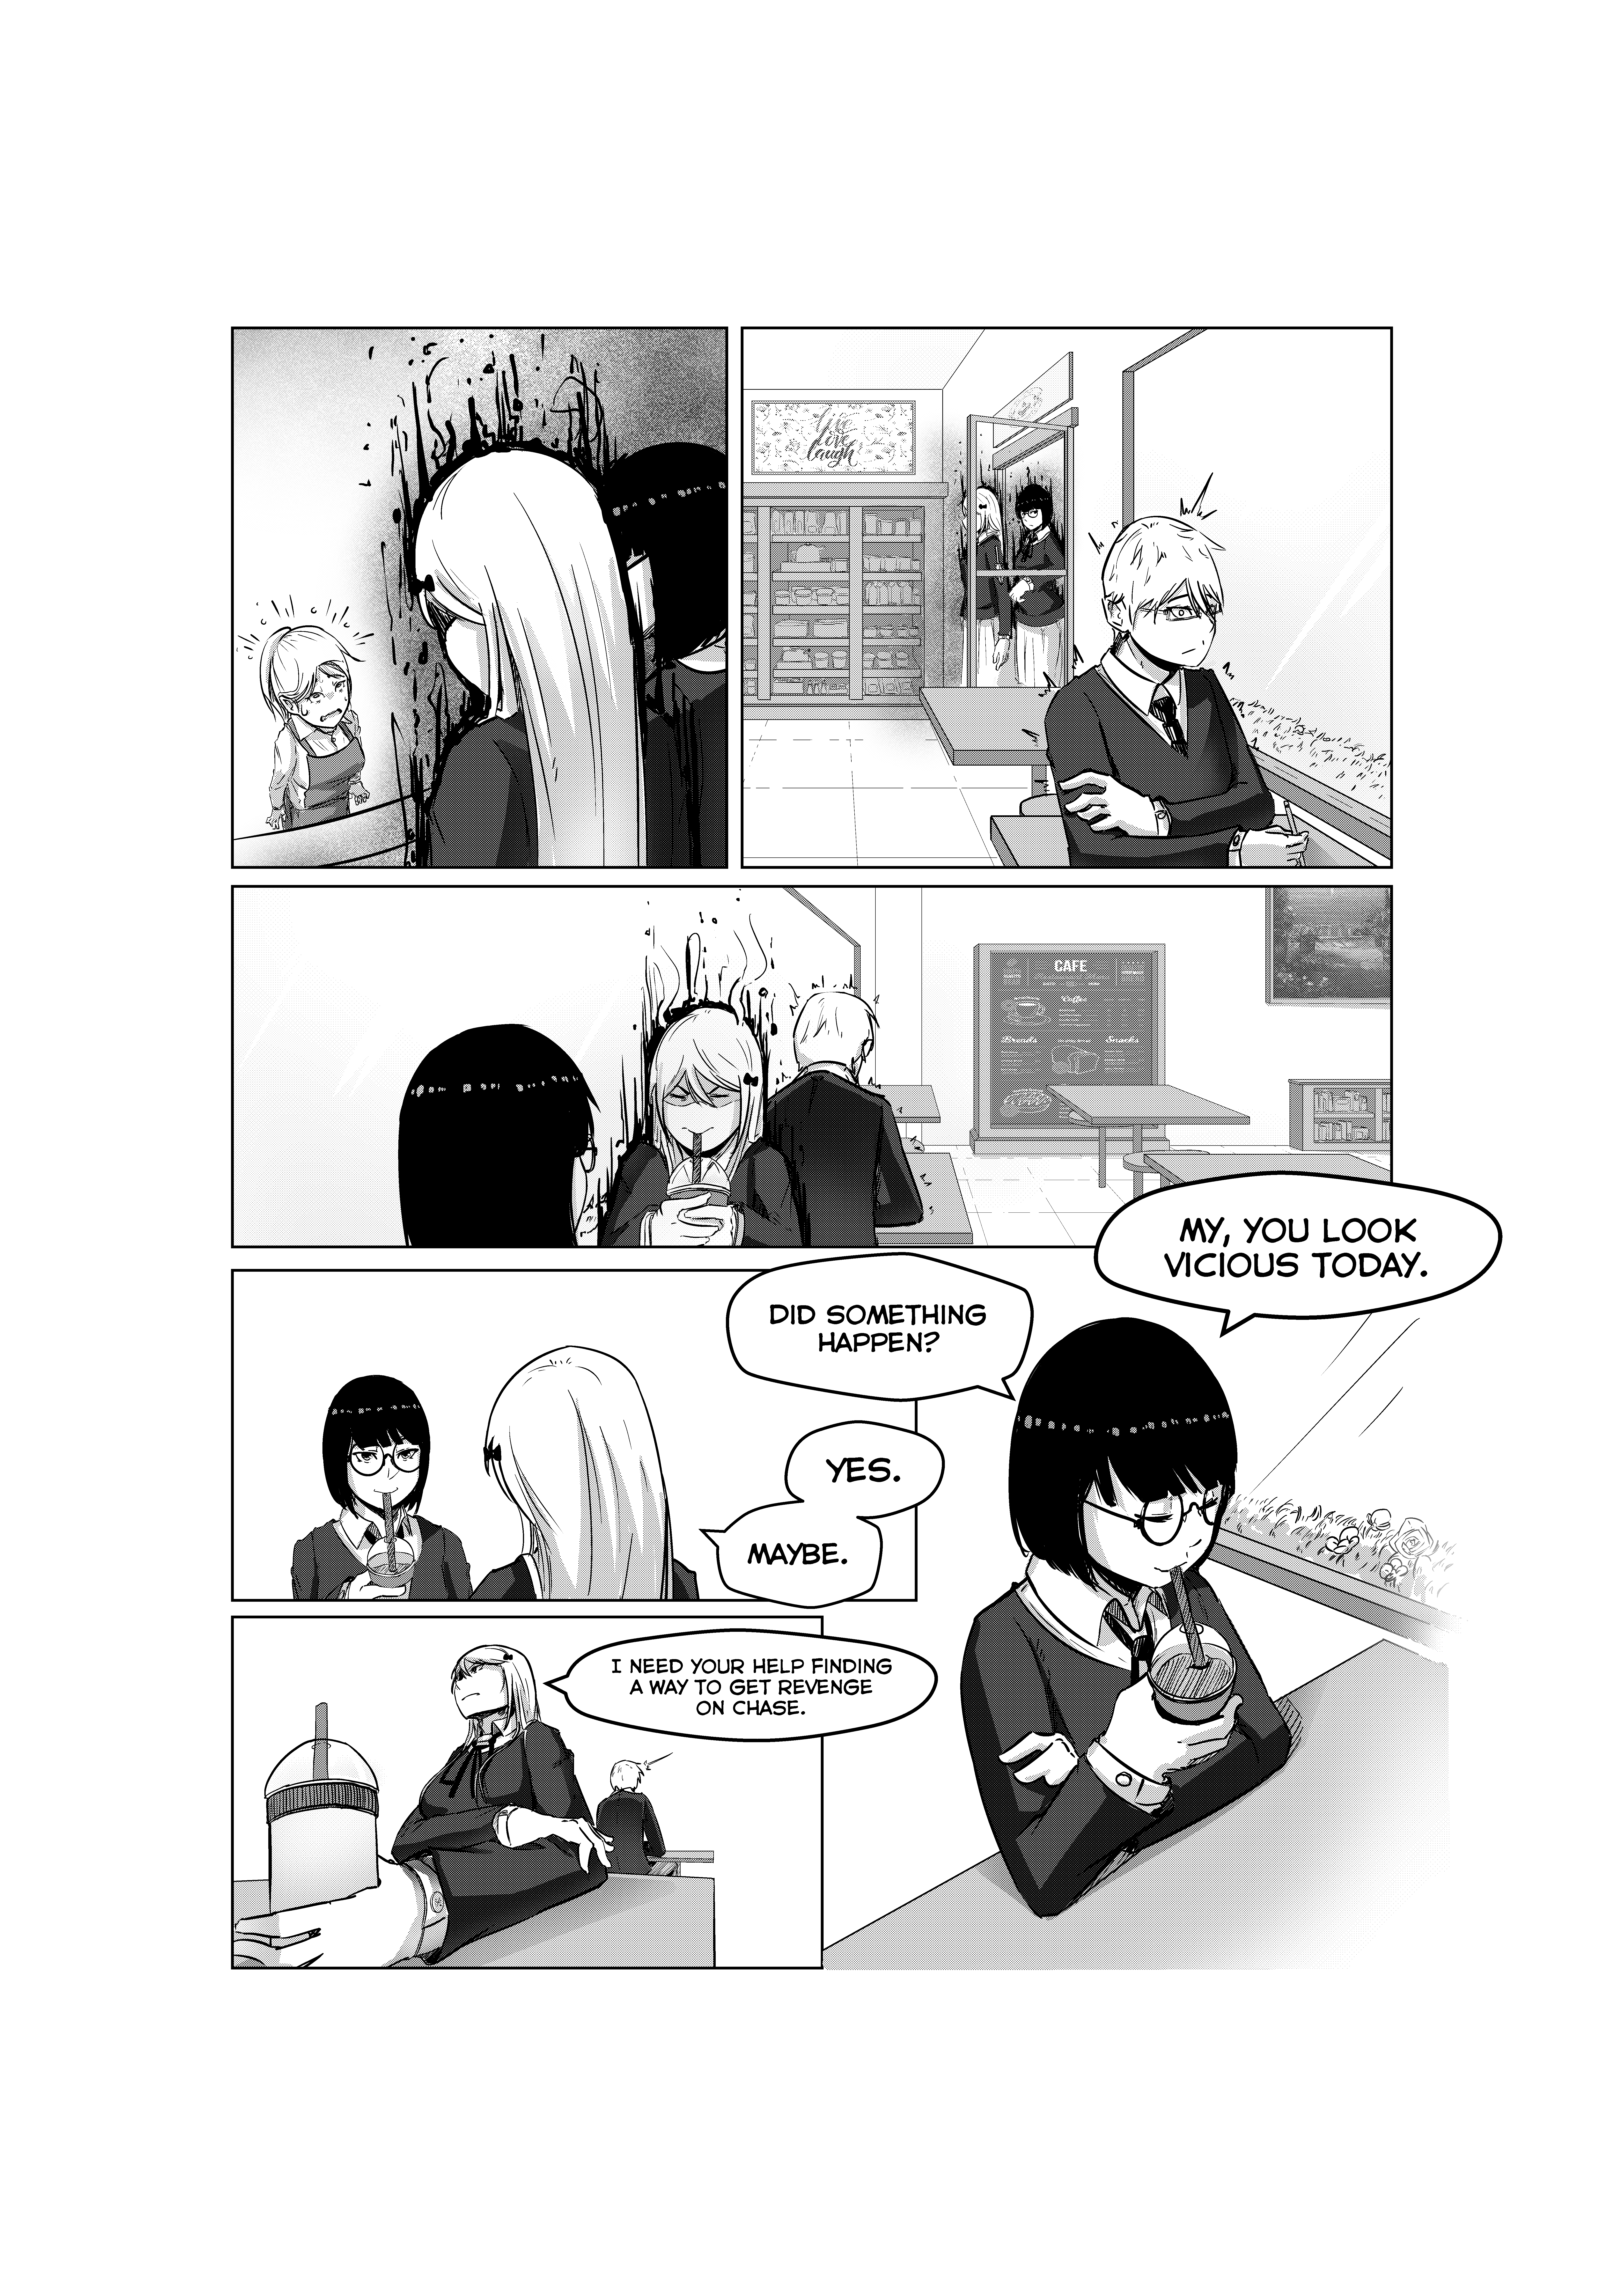 Opposites In Disguise - 9 page 9